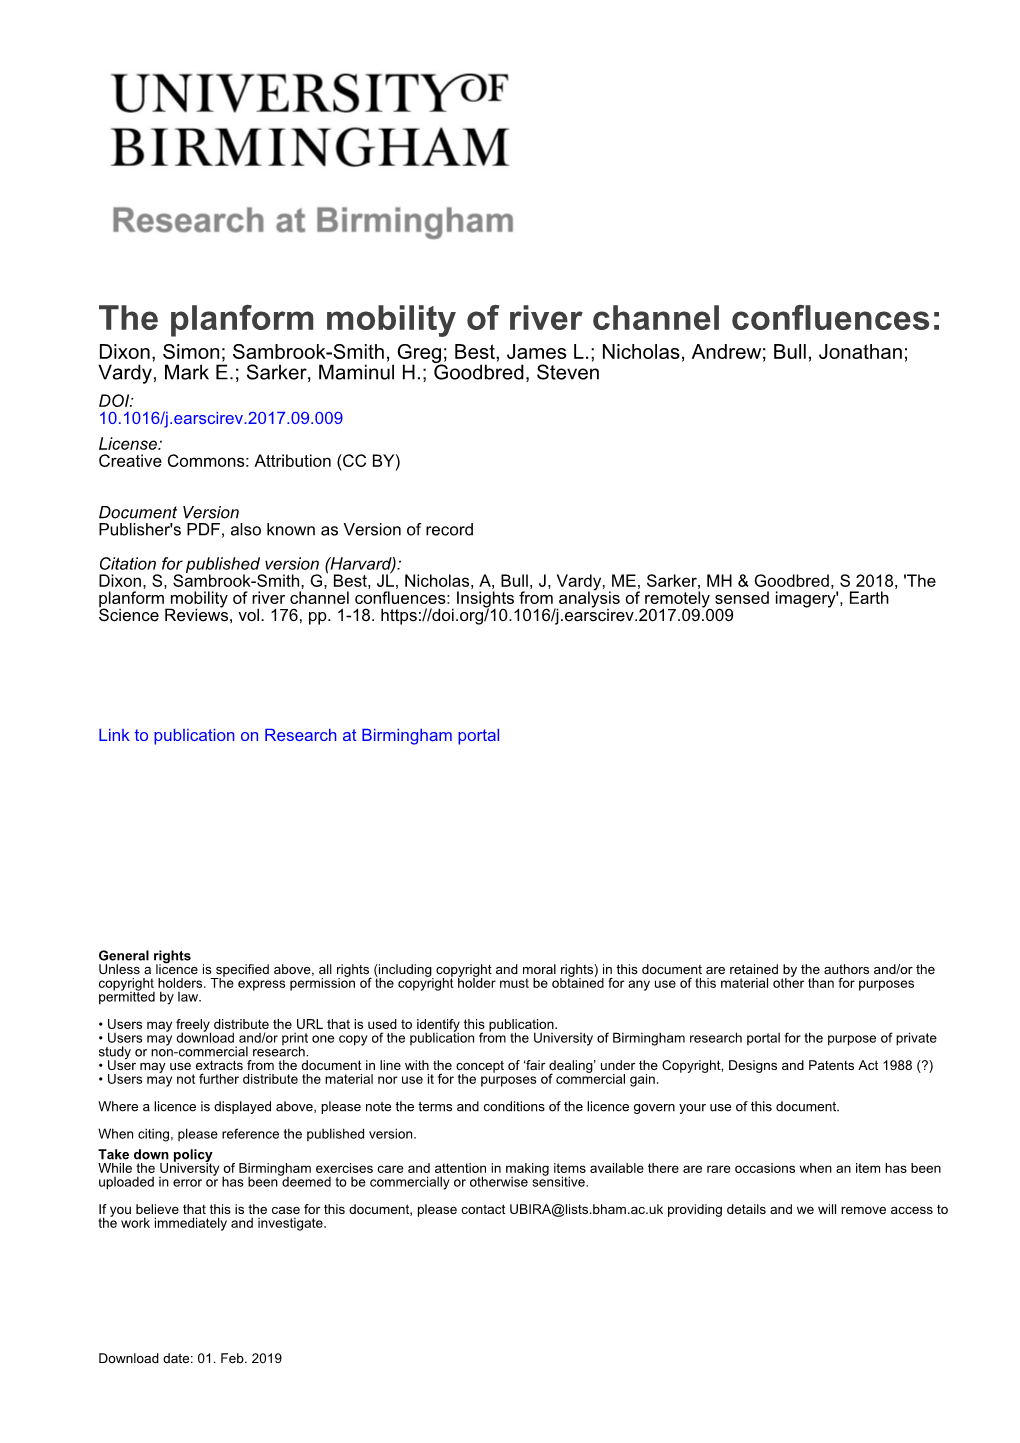 The Planform Mobility of River Channel Confluences Insights from Analysis